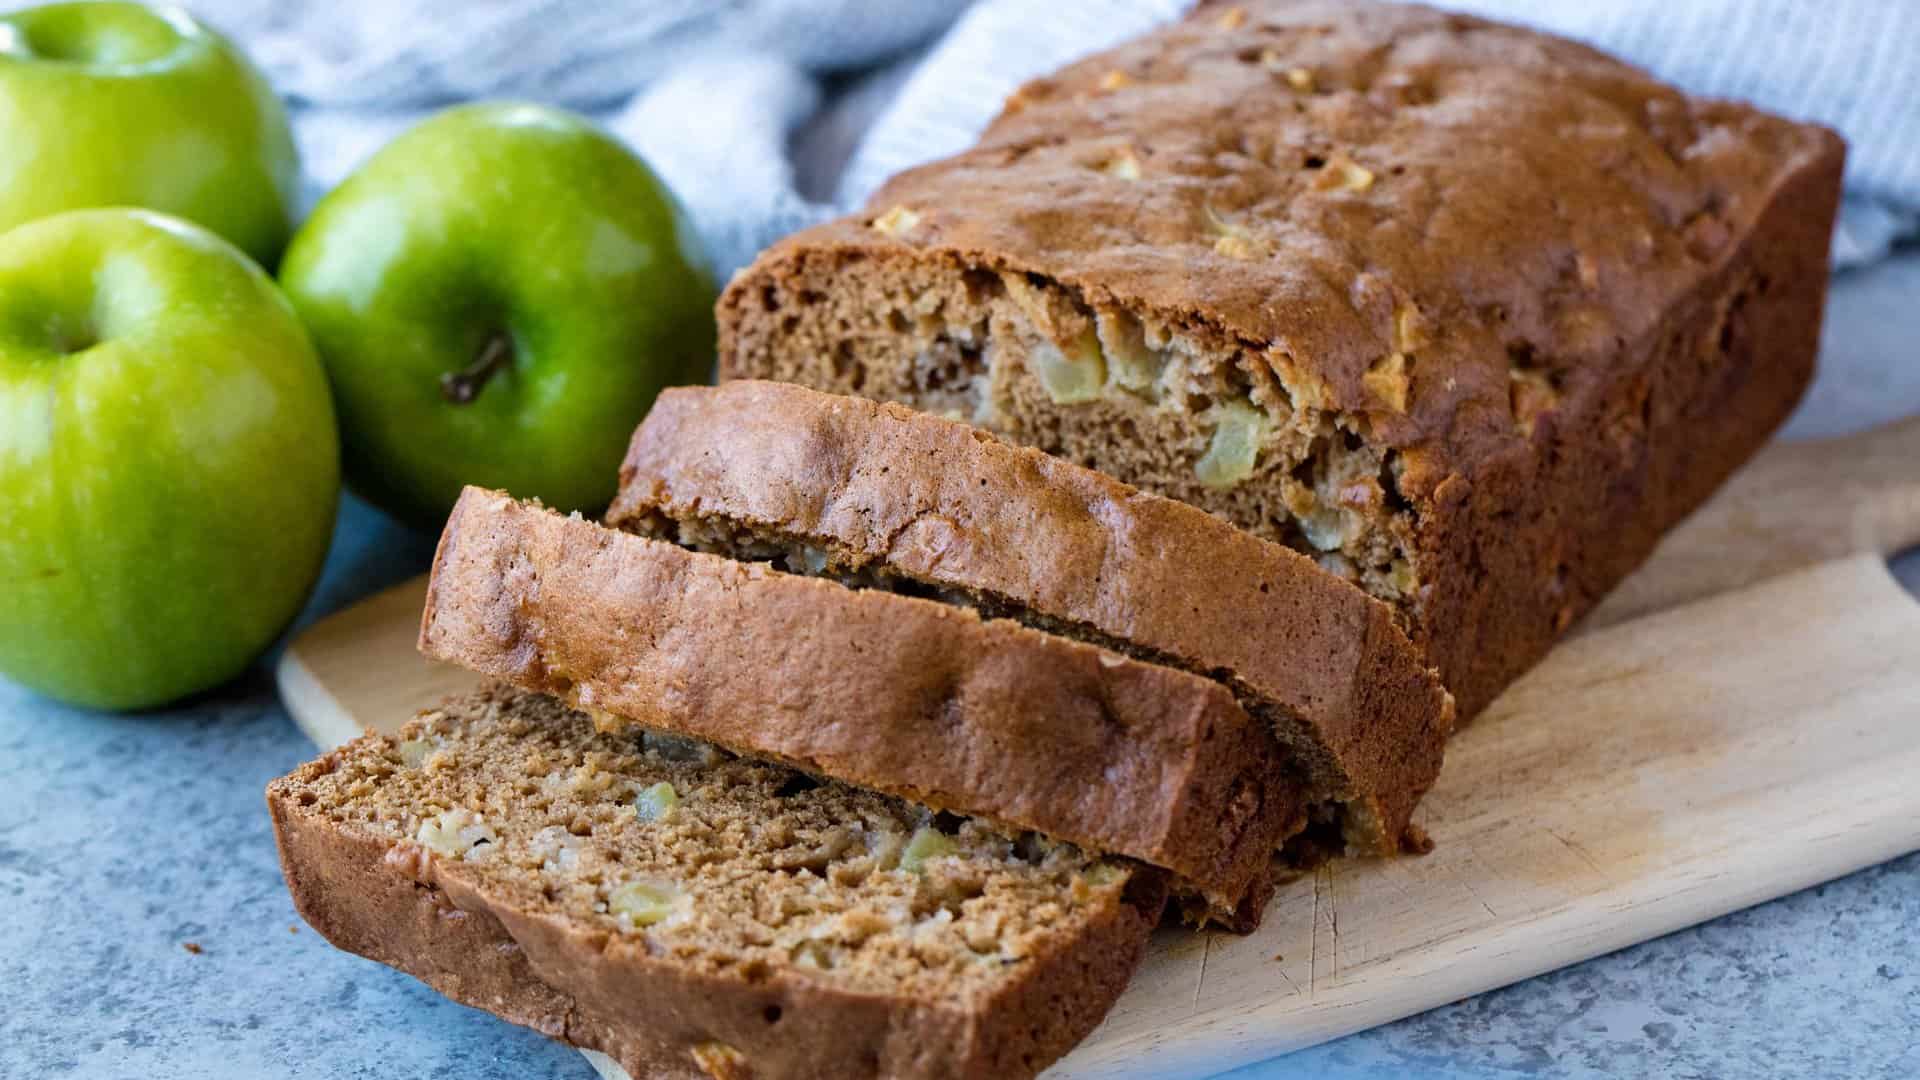 Sliced loaf of apple bread with granny smith apples in the background